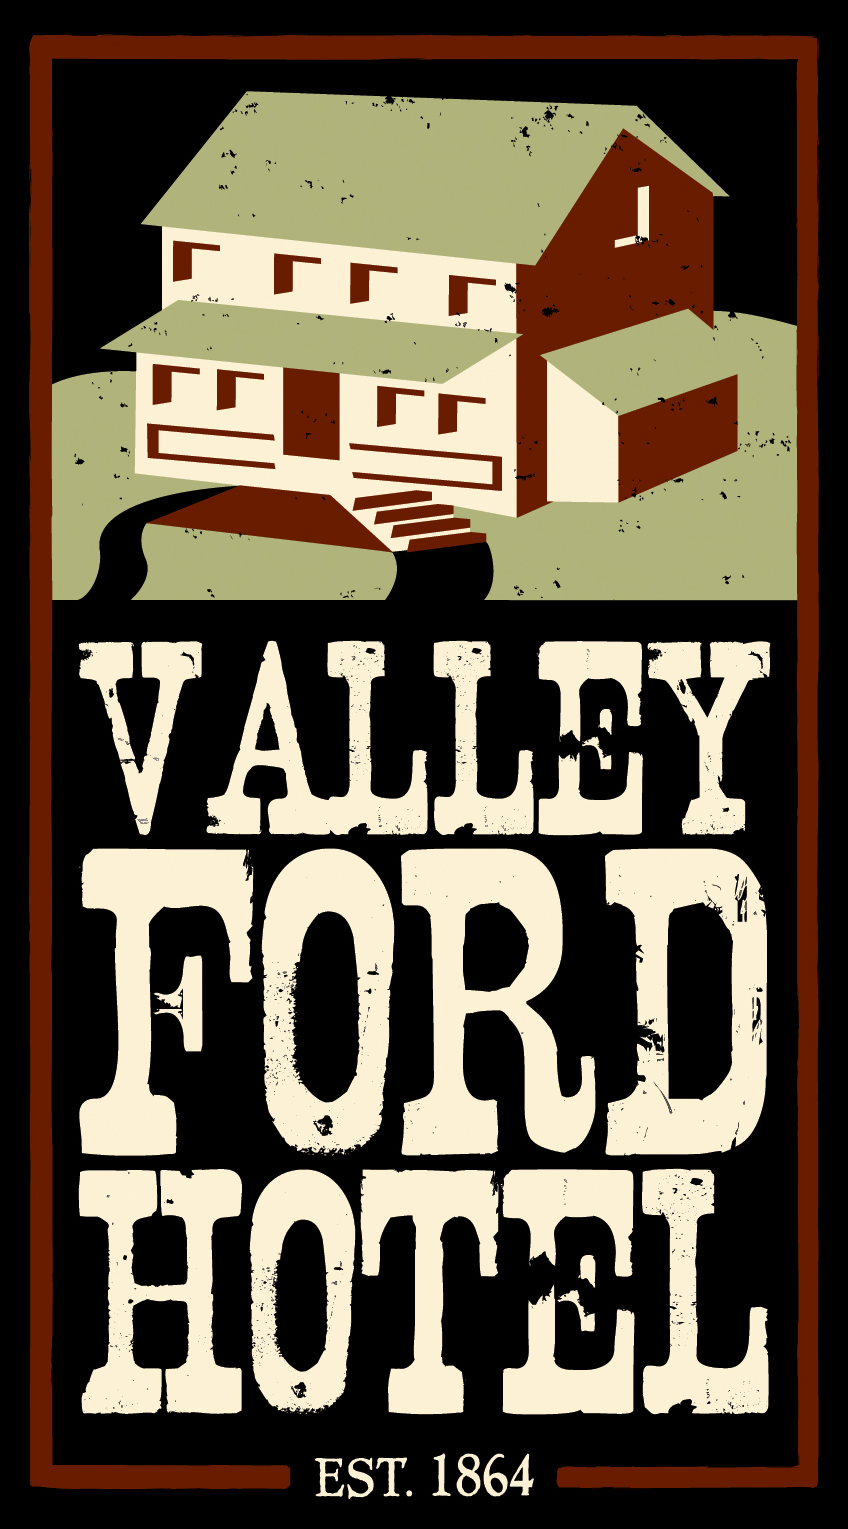 Valley Ford Hotel